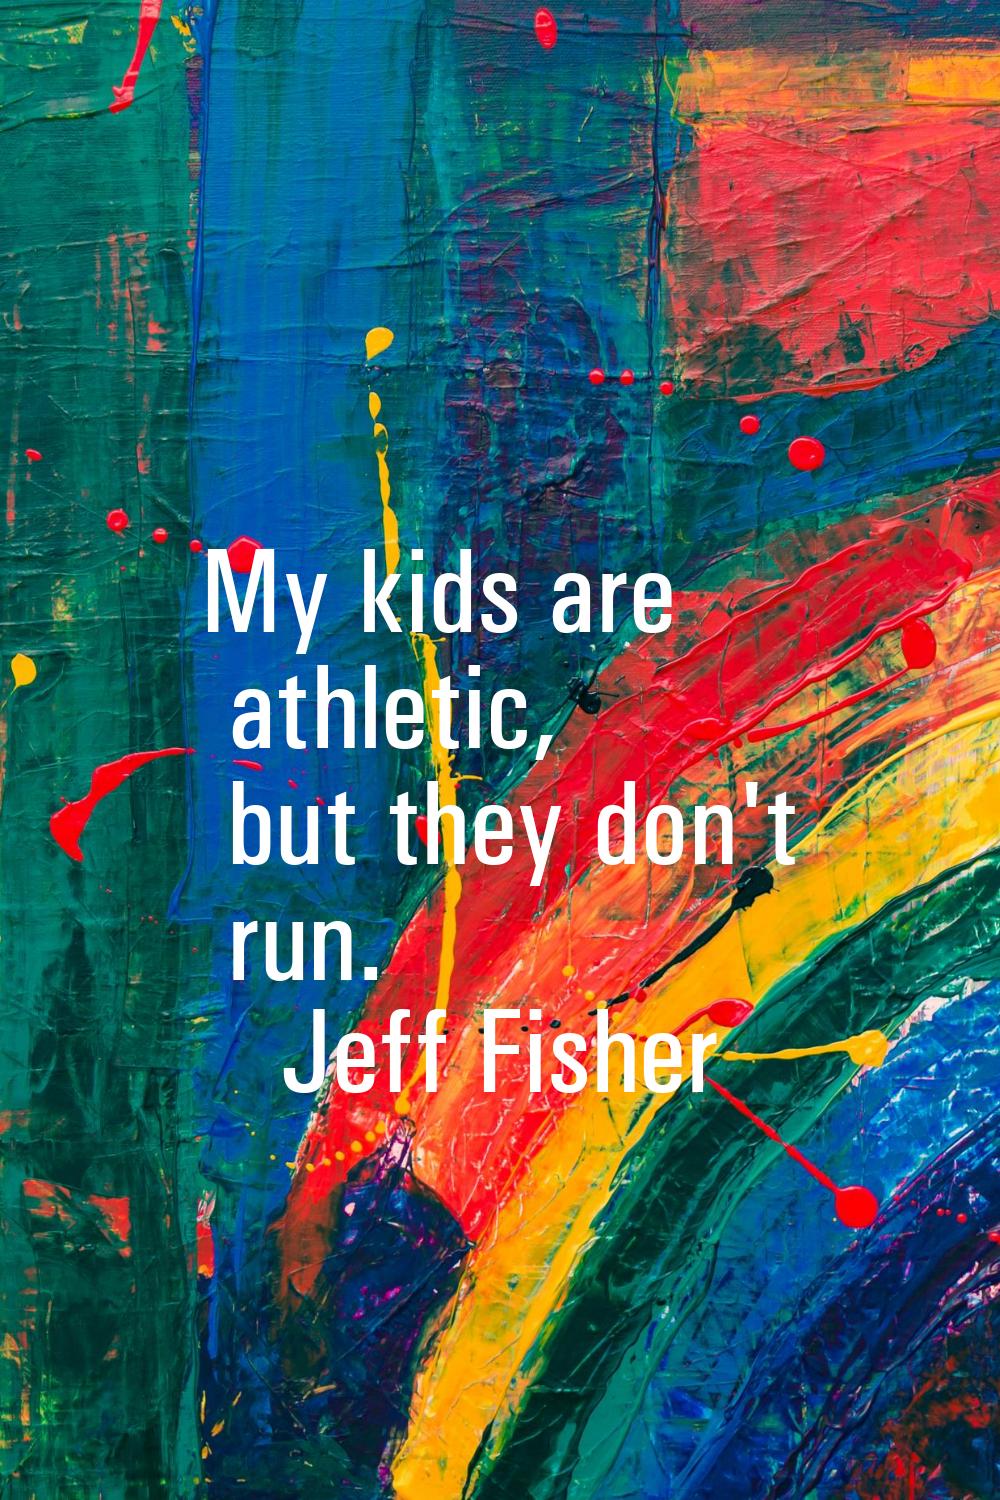 My kids are athletic, but they don't run.